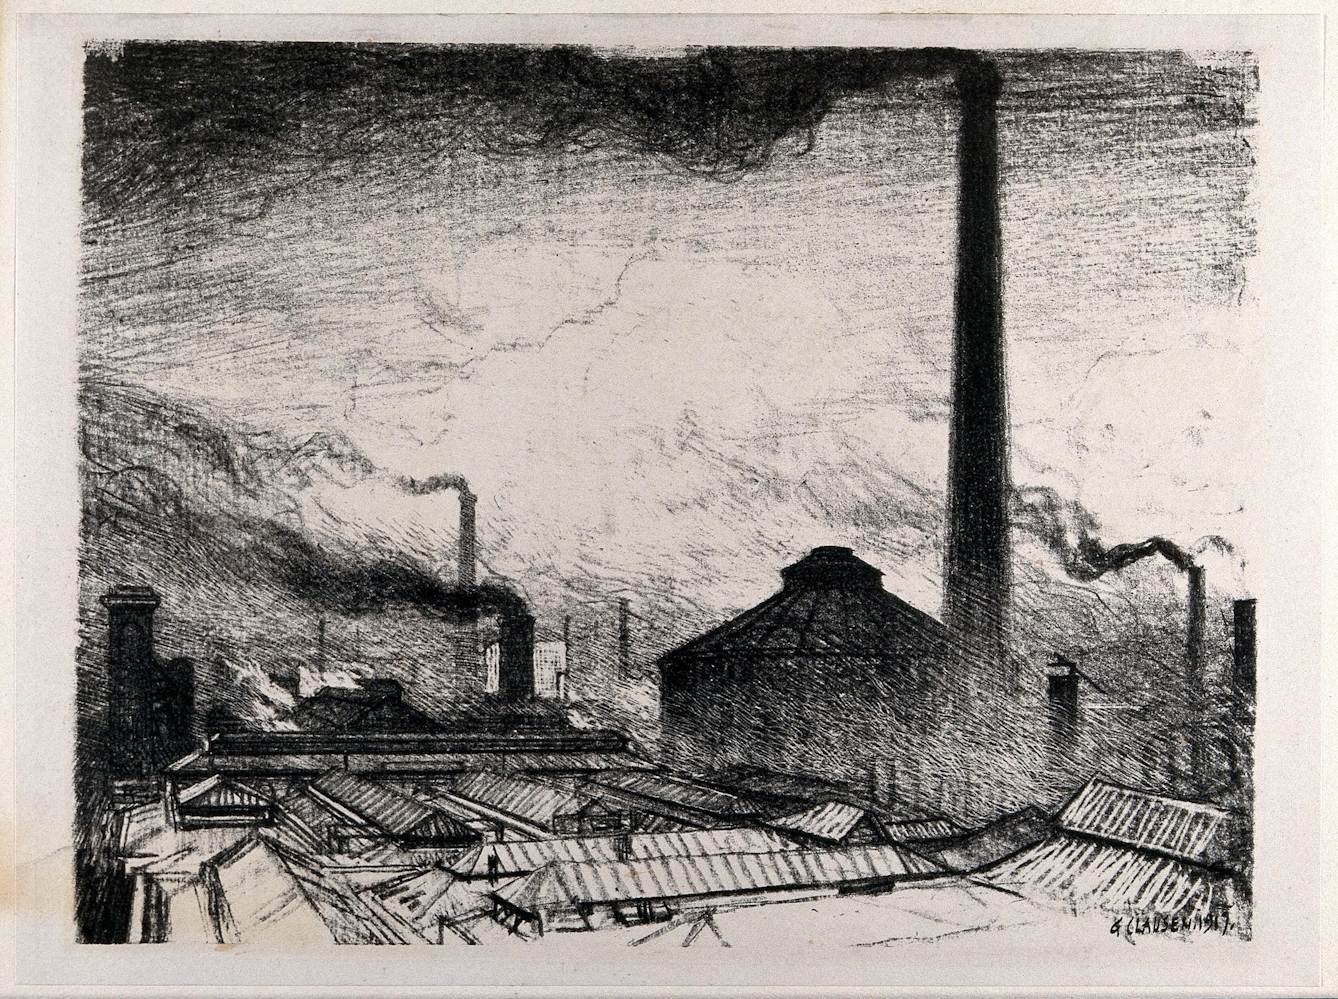 Black and white lithograph of the Royal Gun Factory, Woolwich Arsenal. The image shows the factory buildings from above, with lots of smoke coming from the chimneys. 